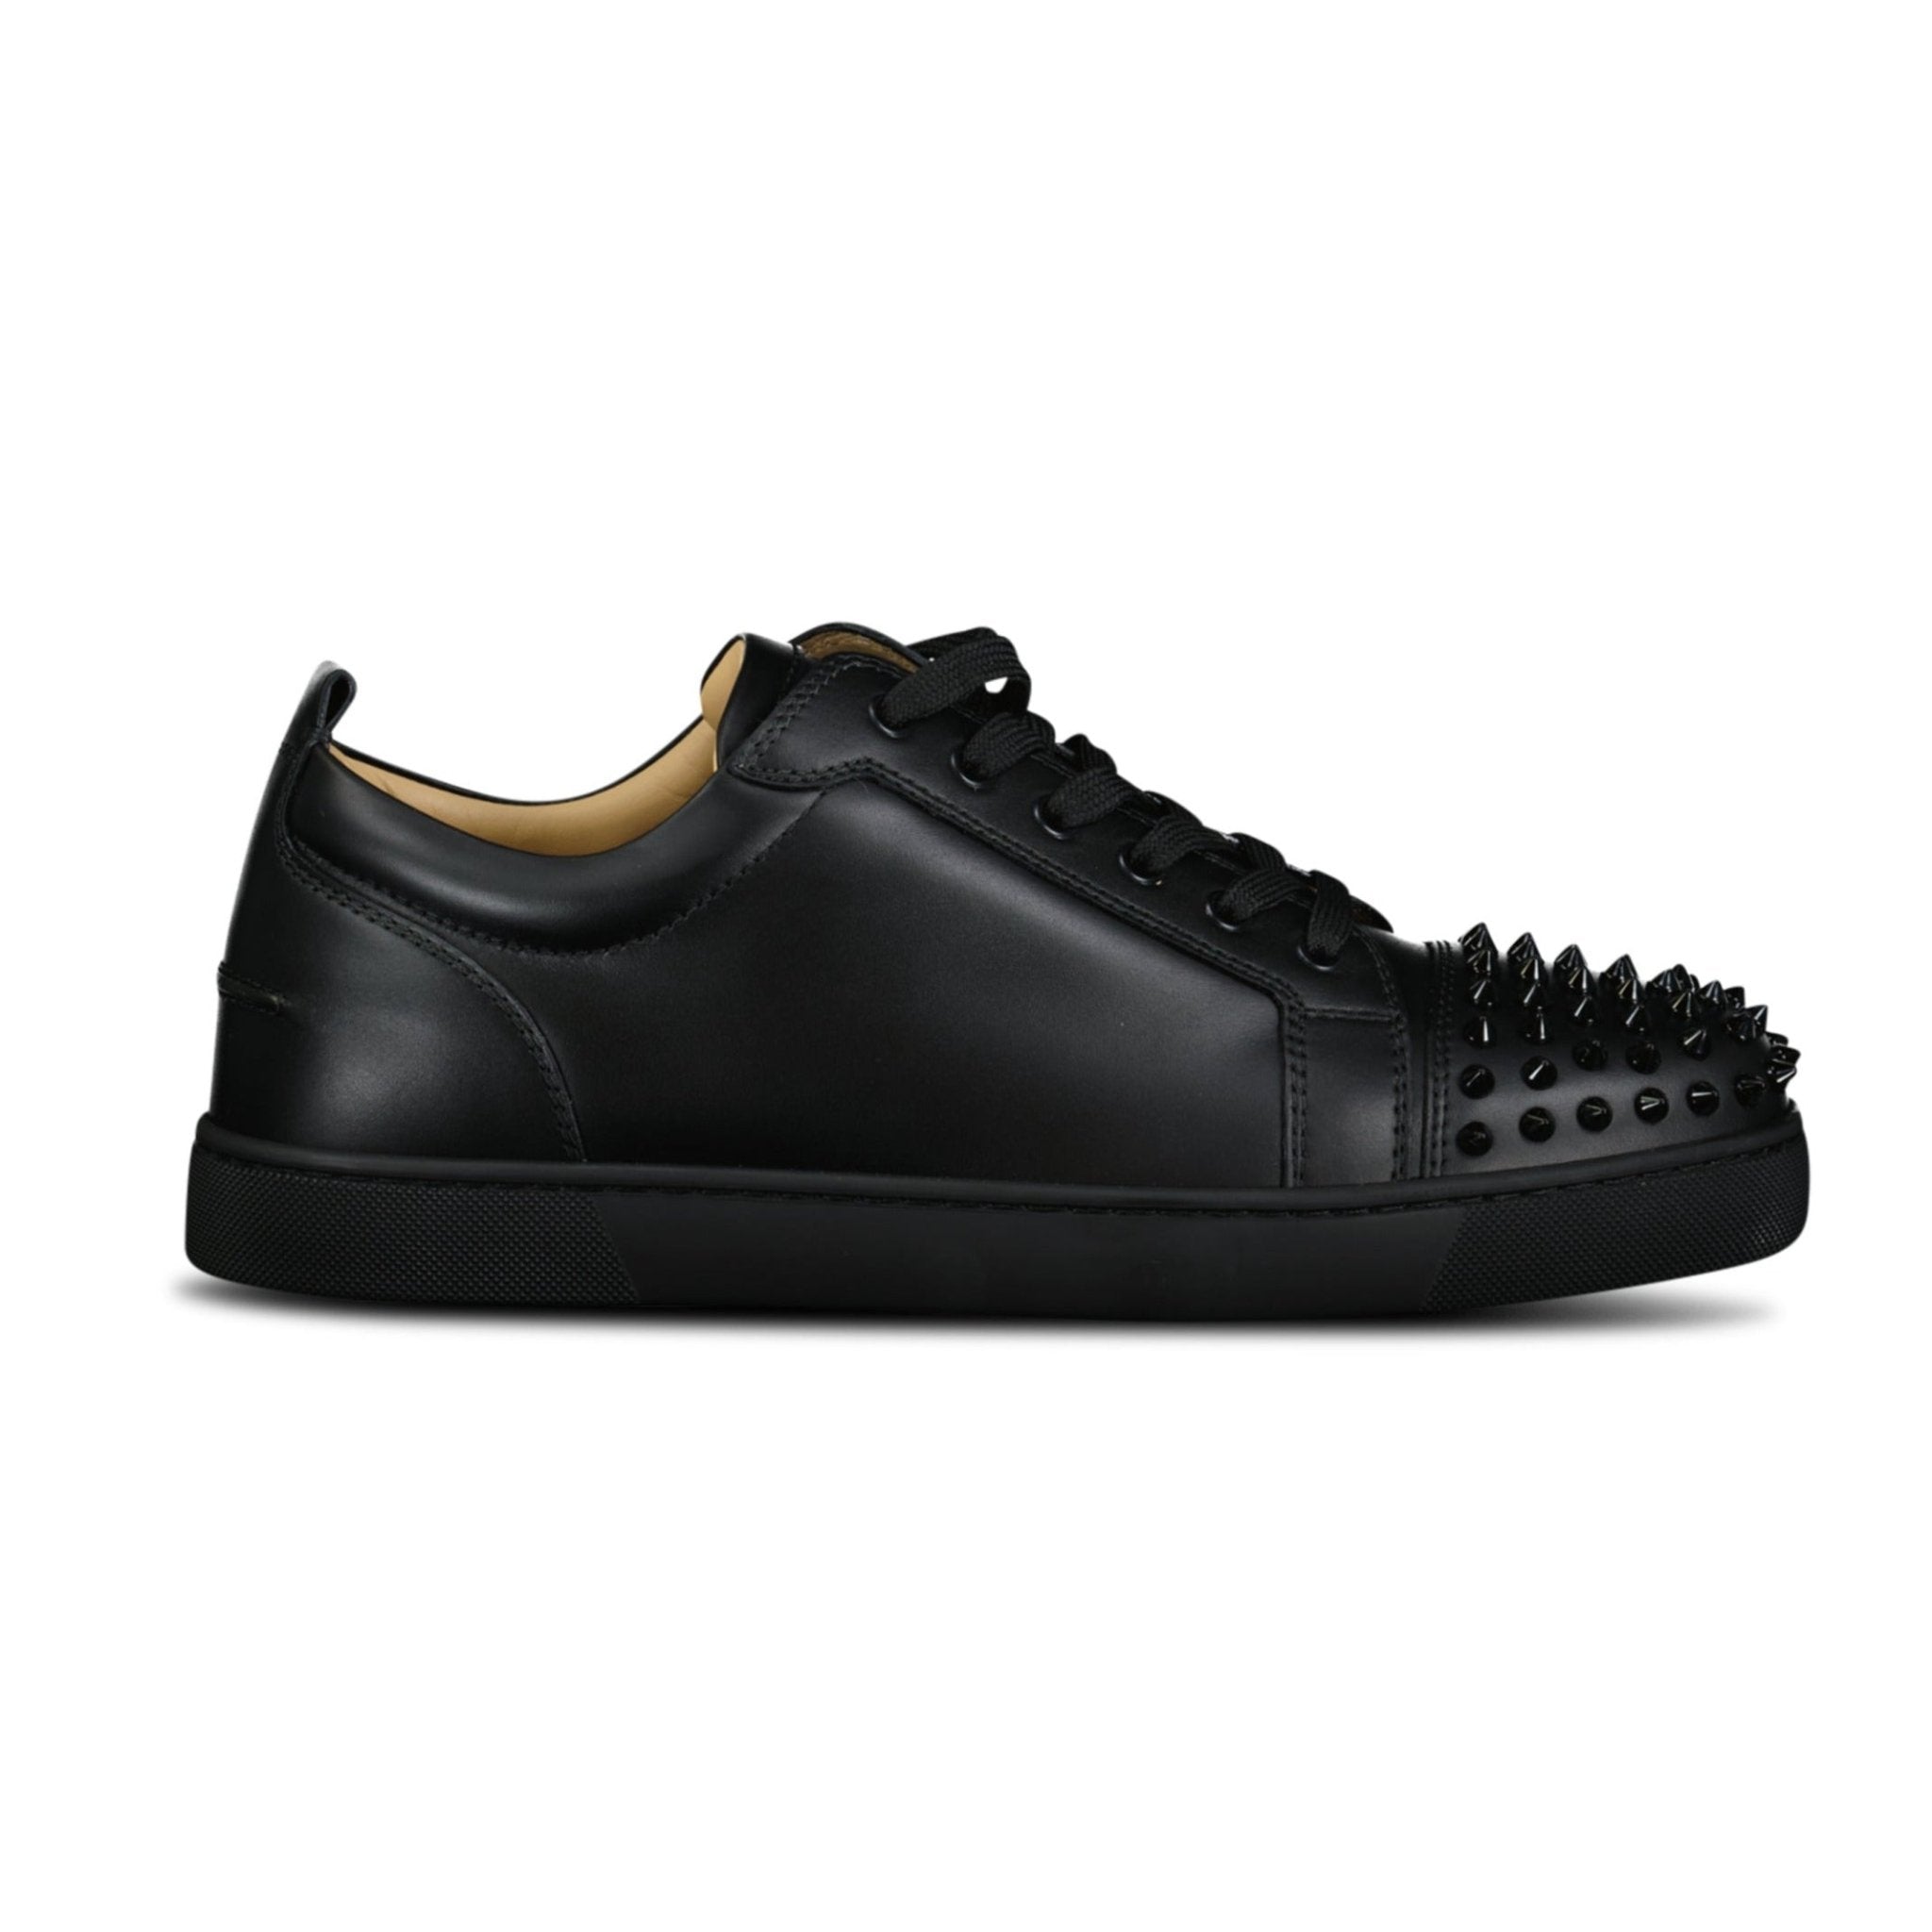 Christian Louboutin 'Junior Spikes' Leather Sneakers Black